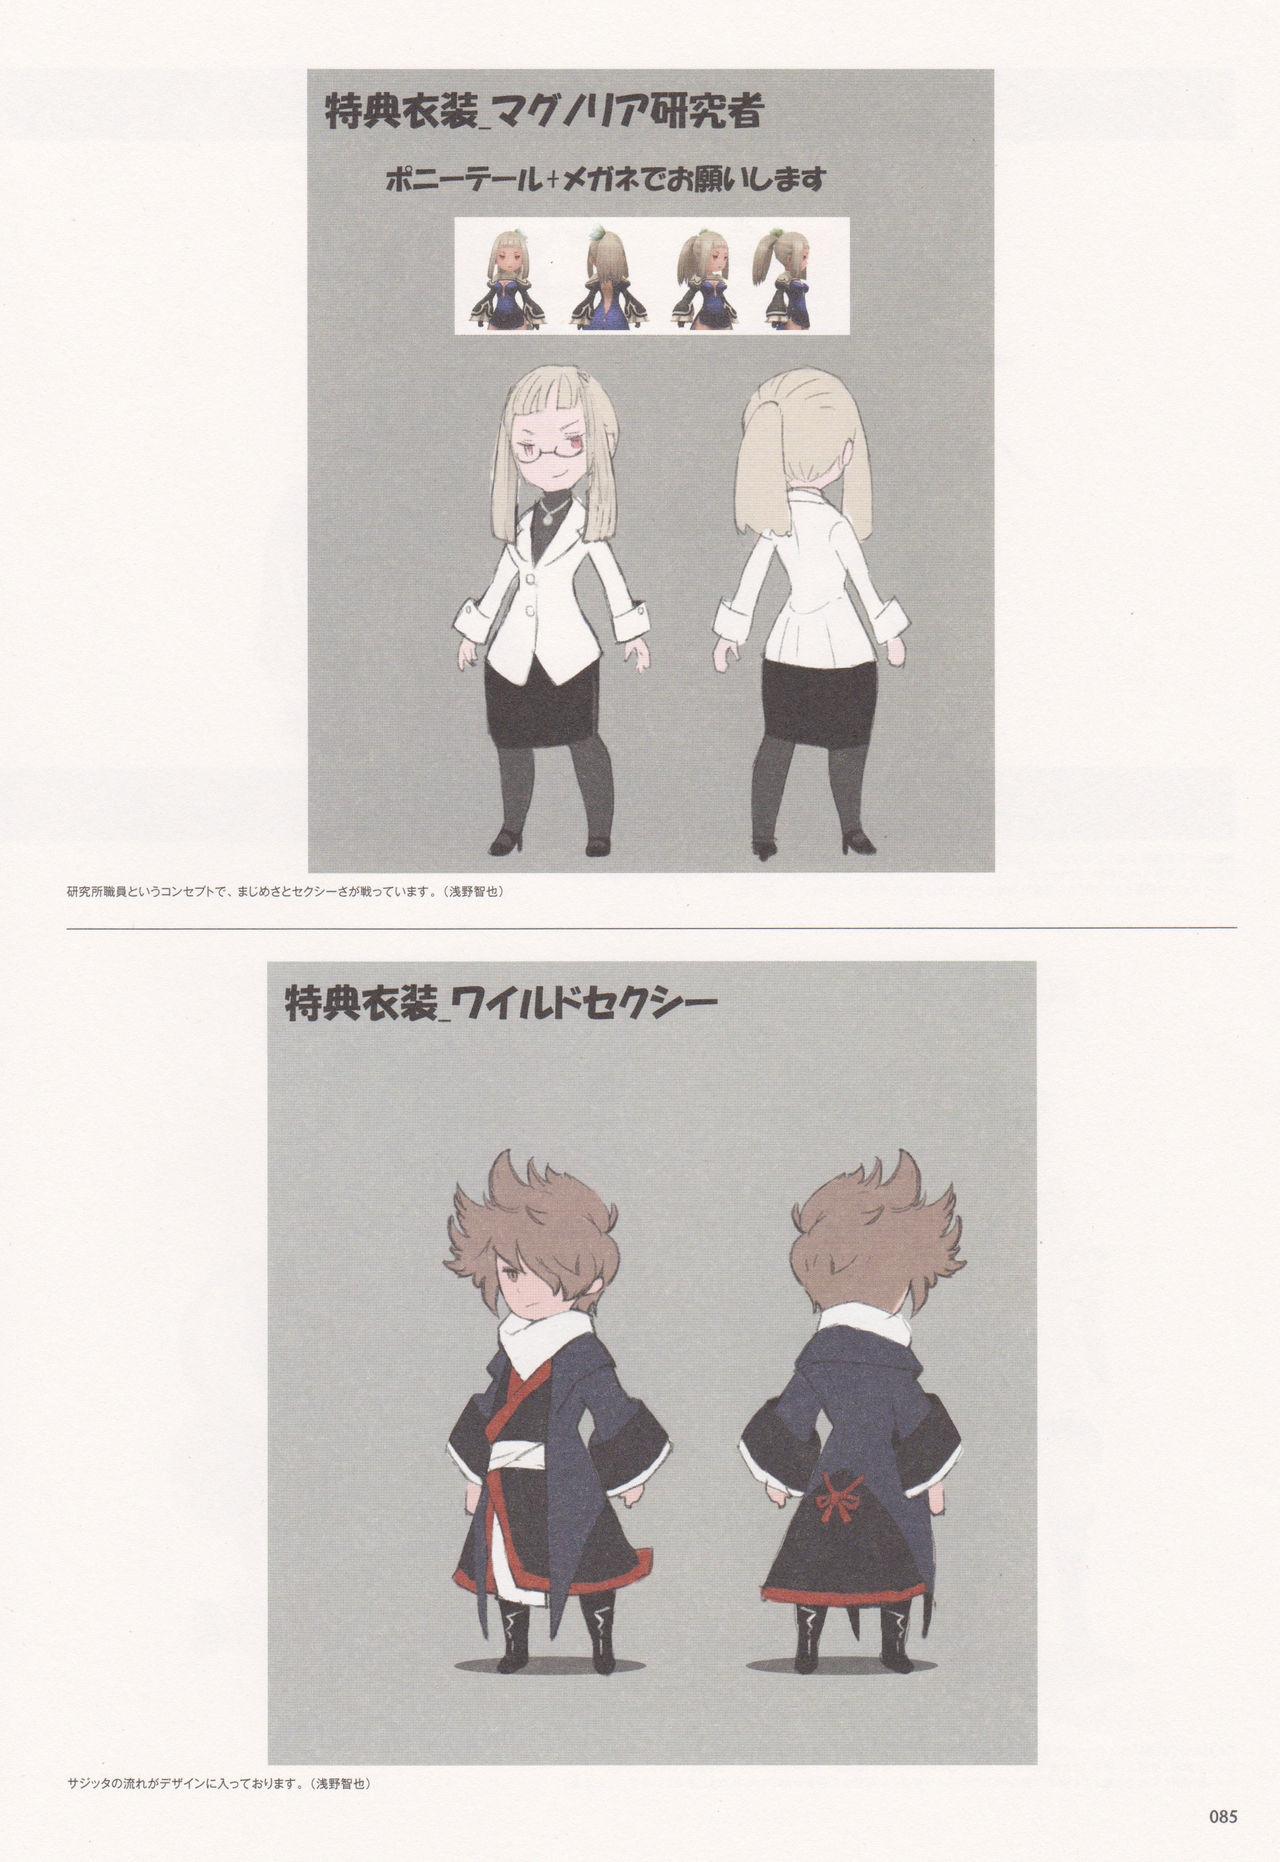 Bravely Second - End Layer - Design Works THE ART OF BRAVELY 2013-2015 85